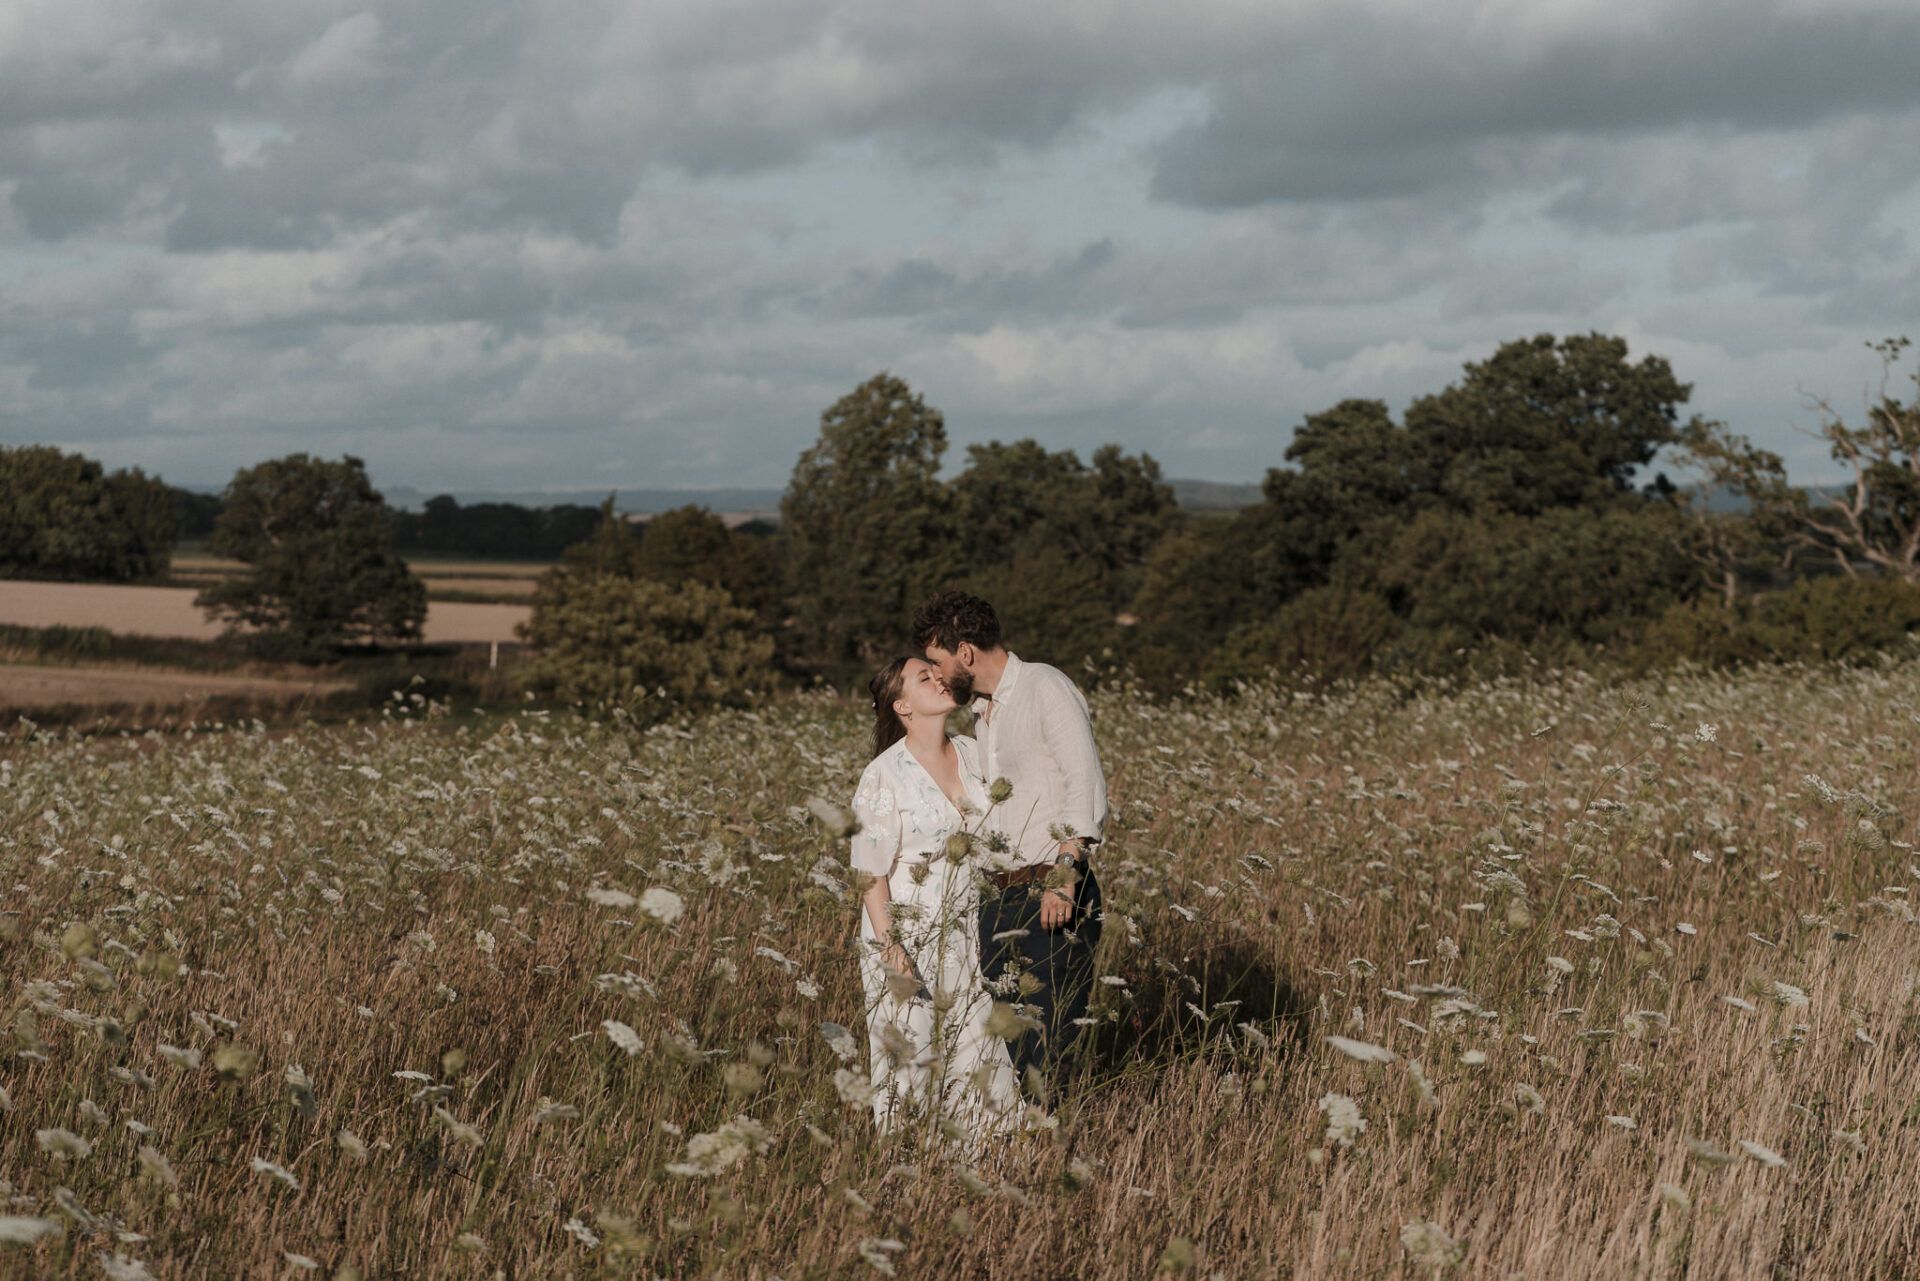 A bride and groom sharing a sweet kiss in a picturesque field of wildflowers at their recent wedding.